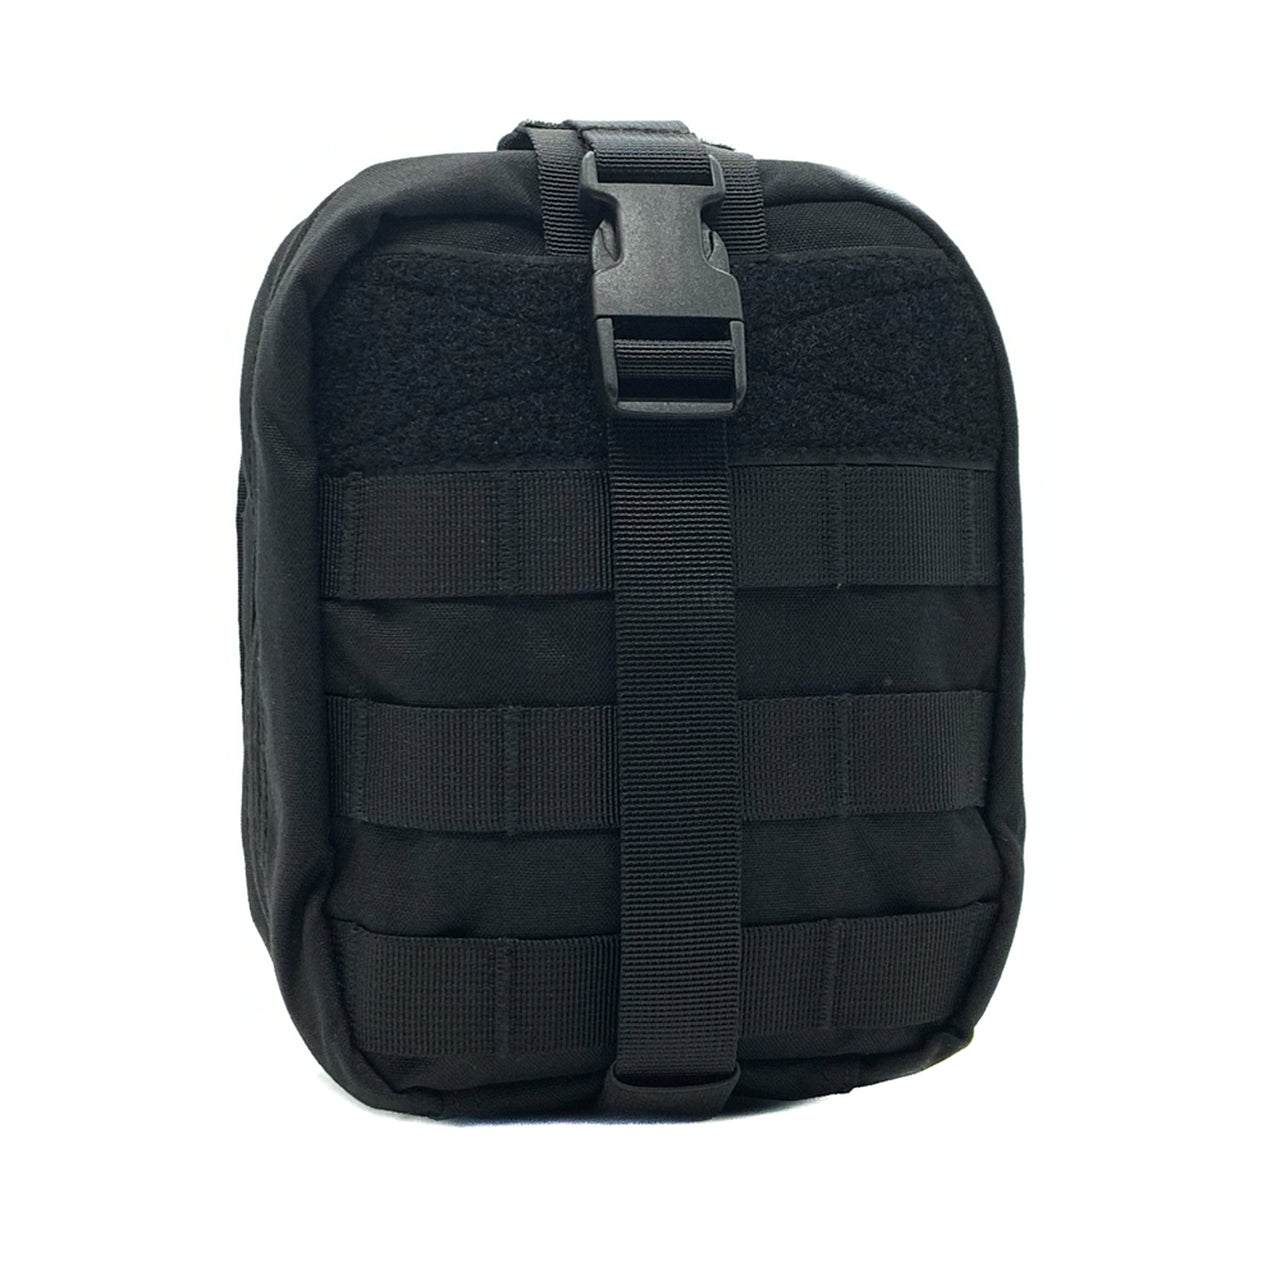 A black medical pouch featuring the Shellback Tactical Rip Away Individual First Aid (IFAK) Medic Pouch design, designed to be used with MOLLE systems. This versatile pouch is ideal for securely storing essential medical supplies such as the Shellback Tactical Rip Away Individual First Aid (IFAK) Medic Pouch.